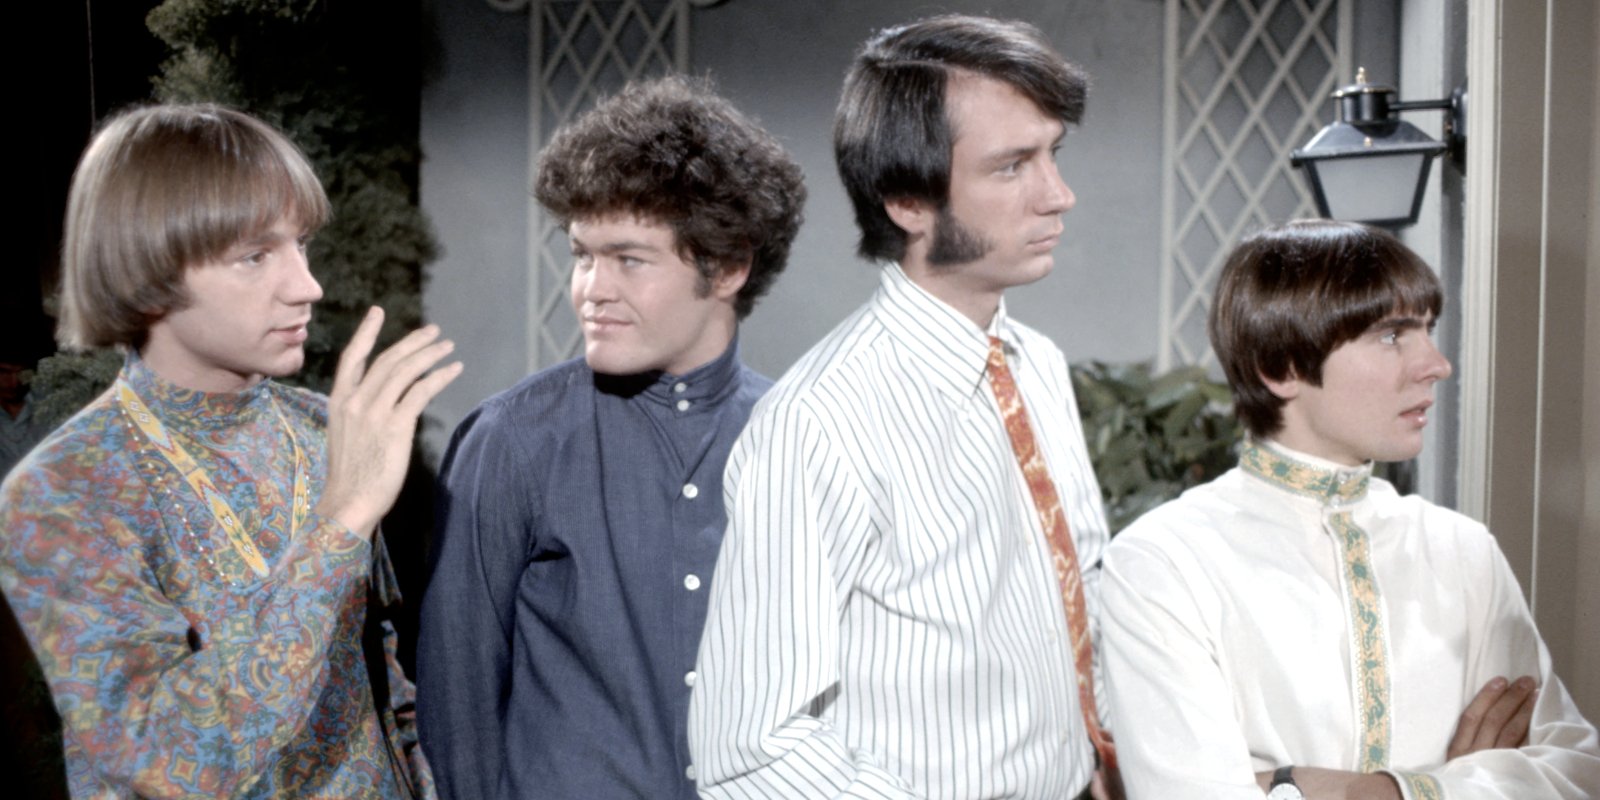 Peter Tork, Micky Dolenz, Davy Jones, and Mike Nesmith on the set of the television series 'The Monkees.'